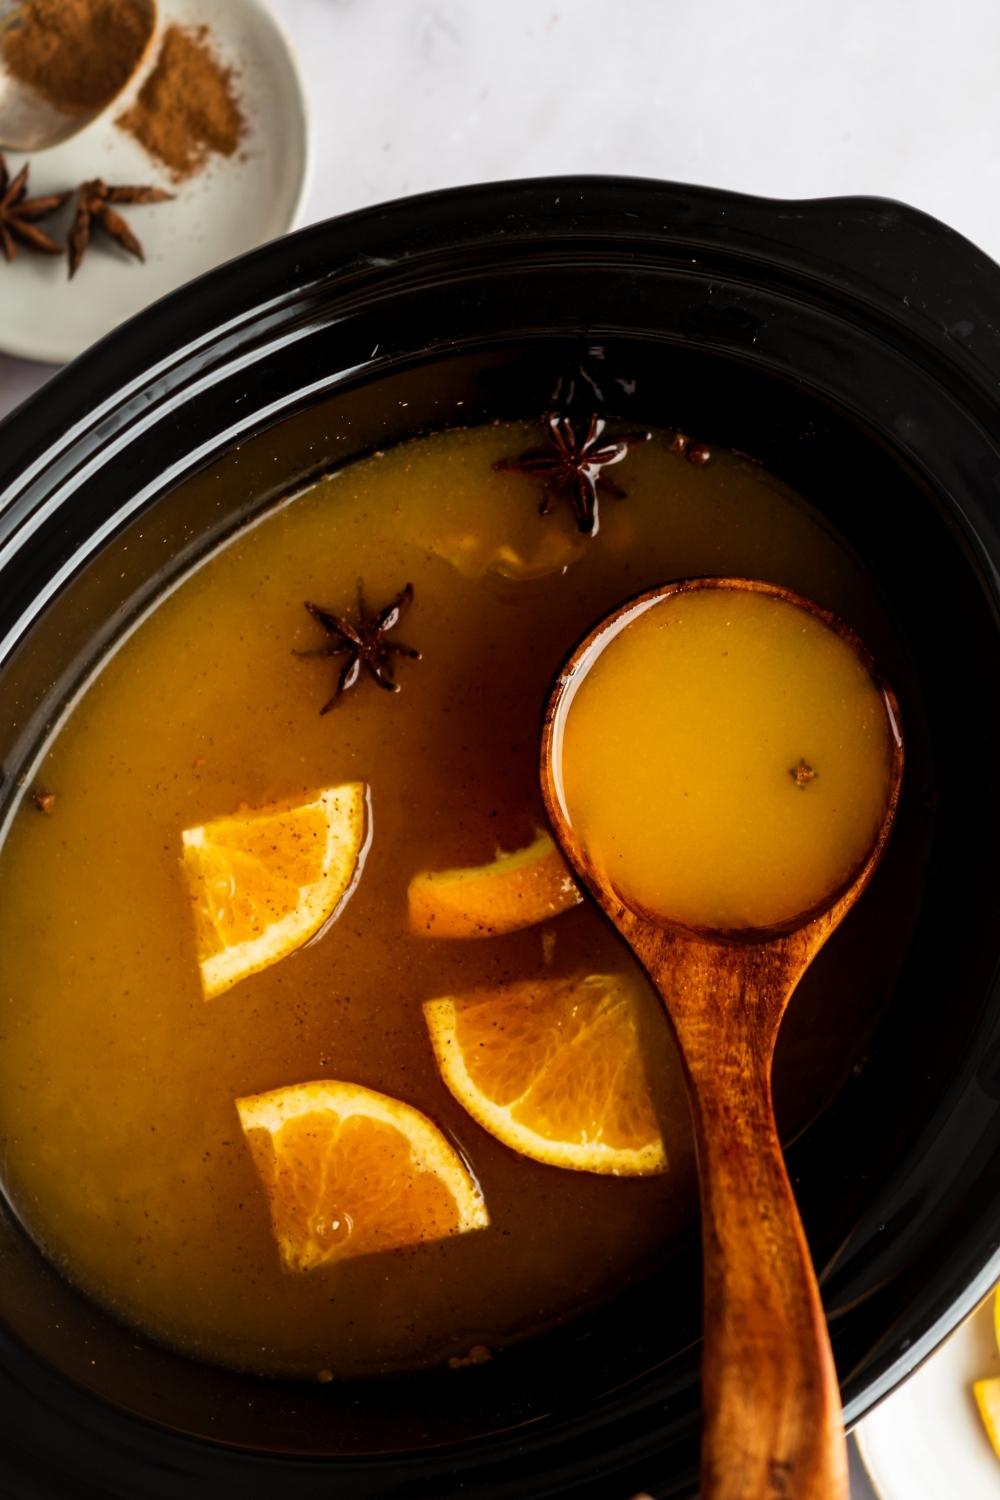 A ladle scooping russian tea out of a crock pot filled with the russian tea.